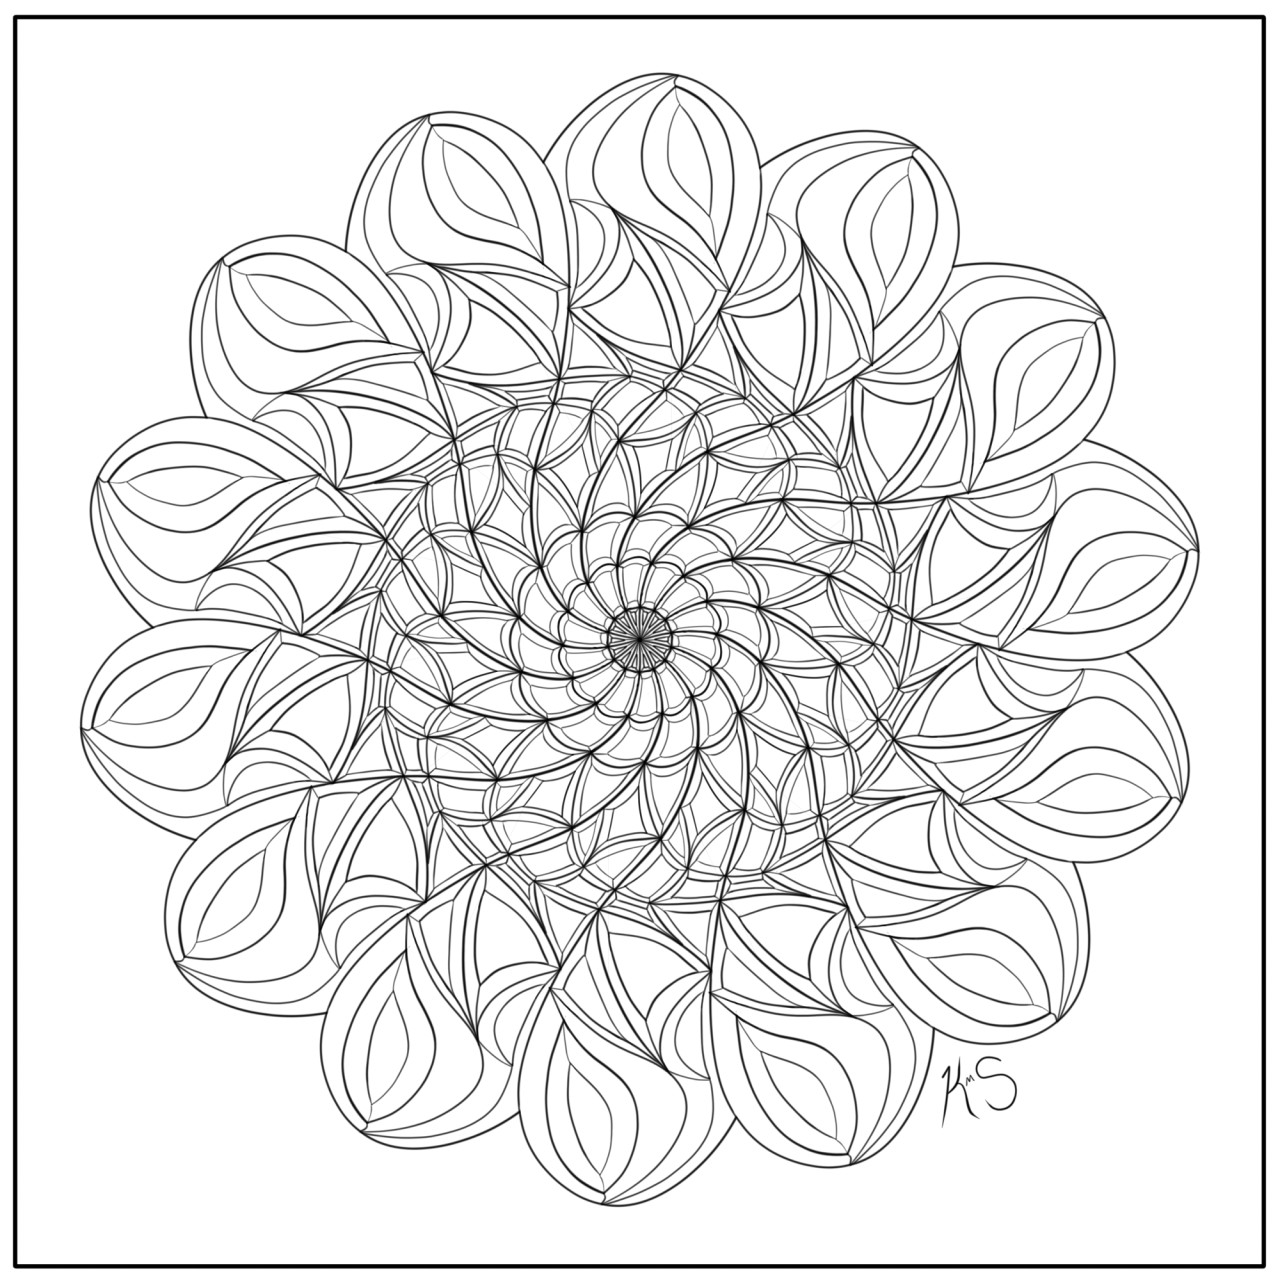 Relaxing Coloring Pages
 Relaxation Coloring Pages Coloring Home